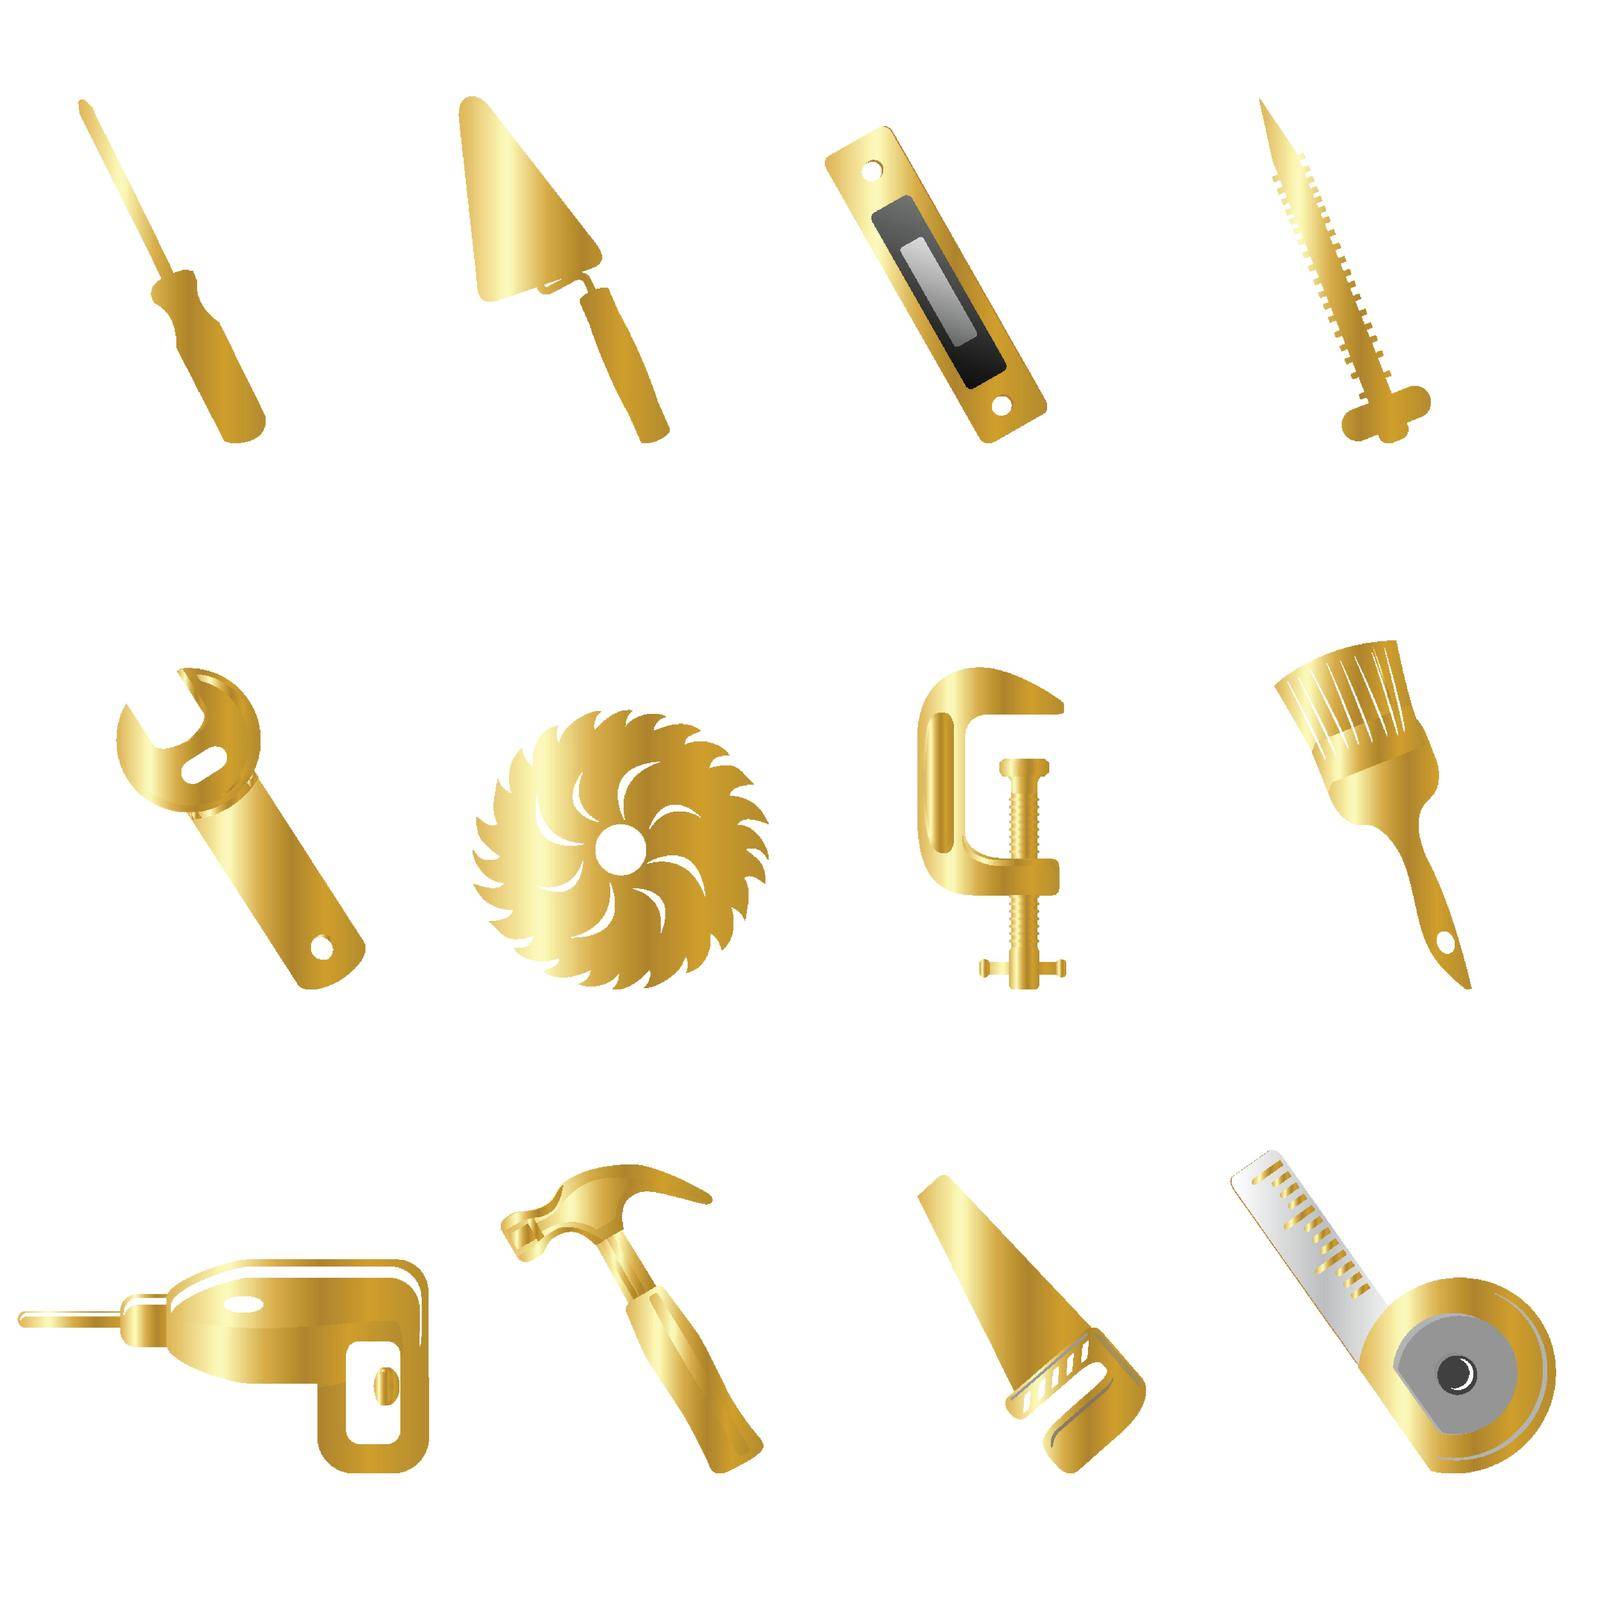 you can use Gold construction icons isolate on white background to design banners, posters, backgrounds, ...etc.